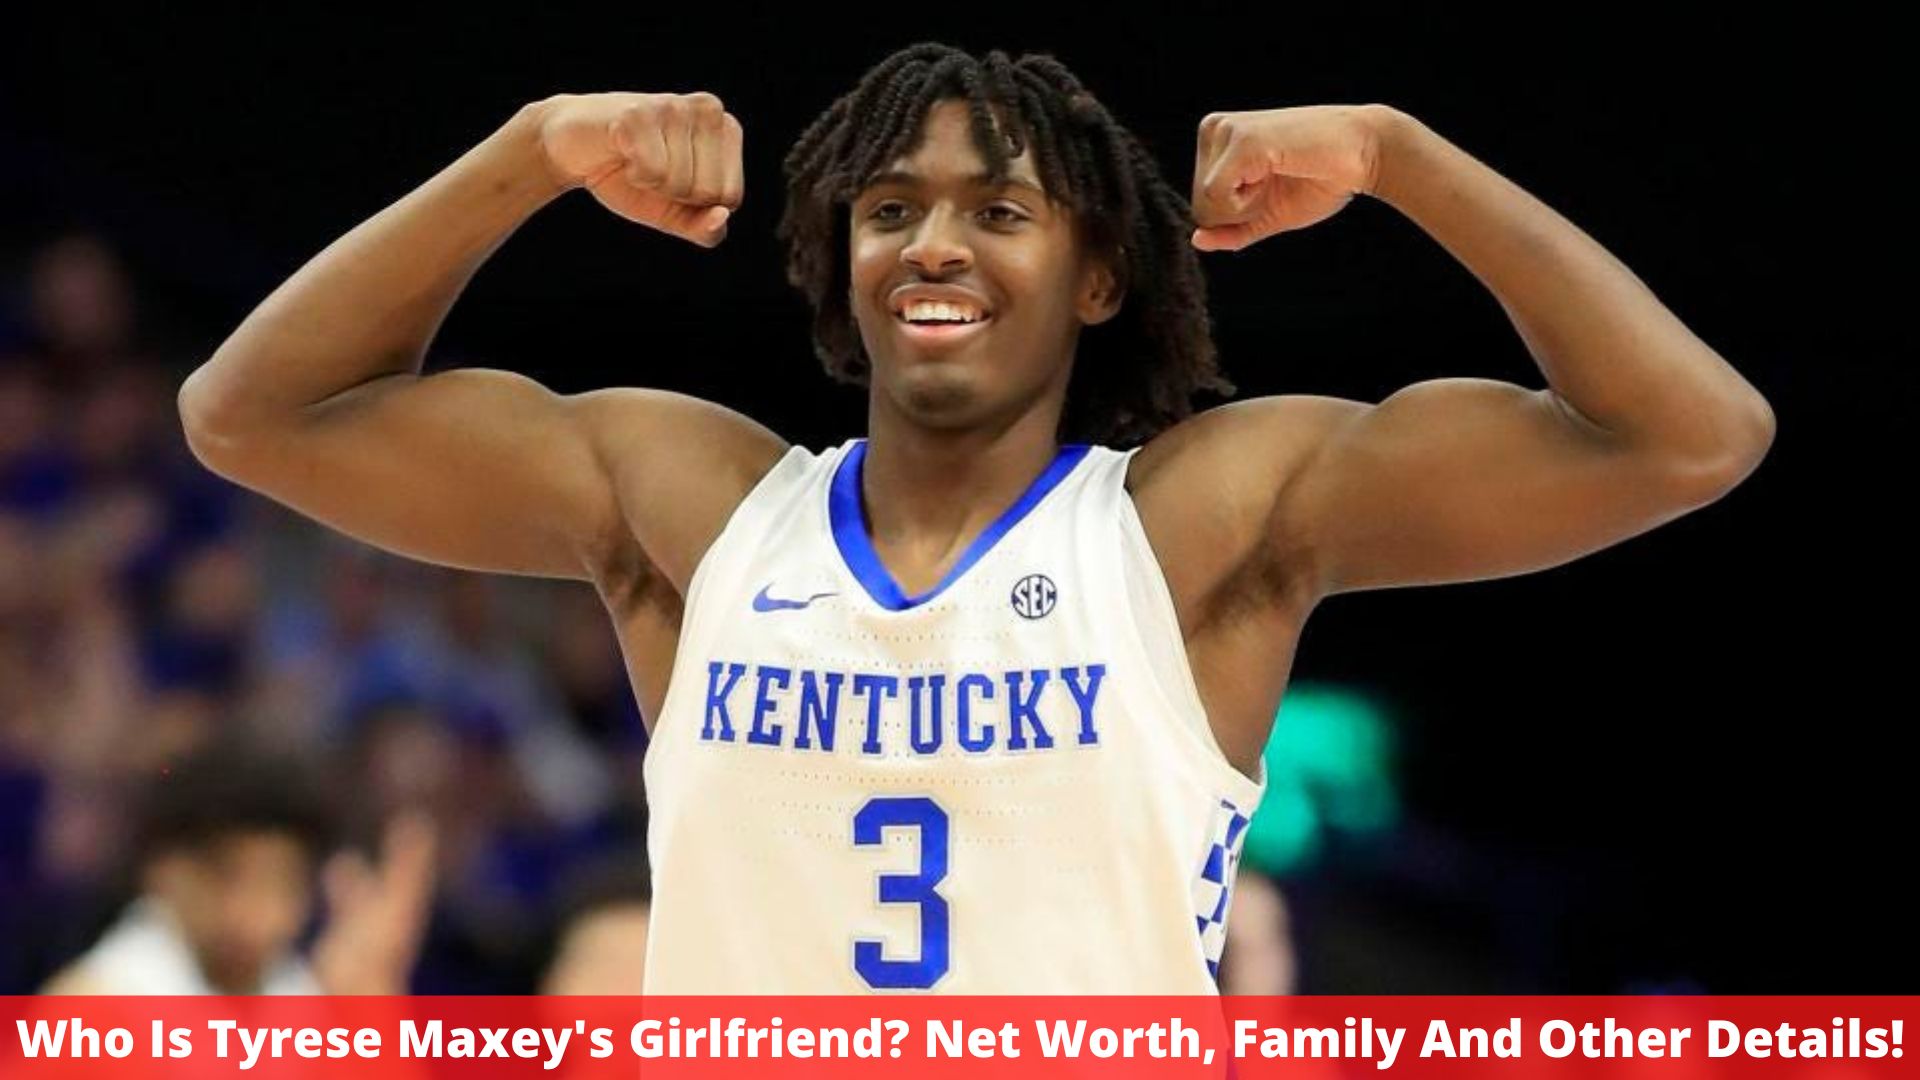 Who Is Tyrese Maxey's Girlfriend? Net Worth, Family And Other Details!